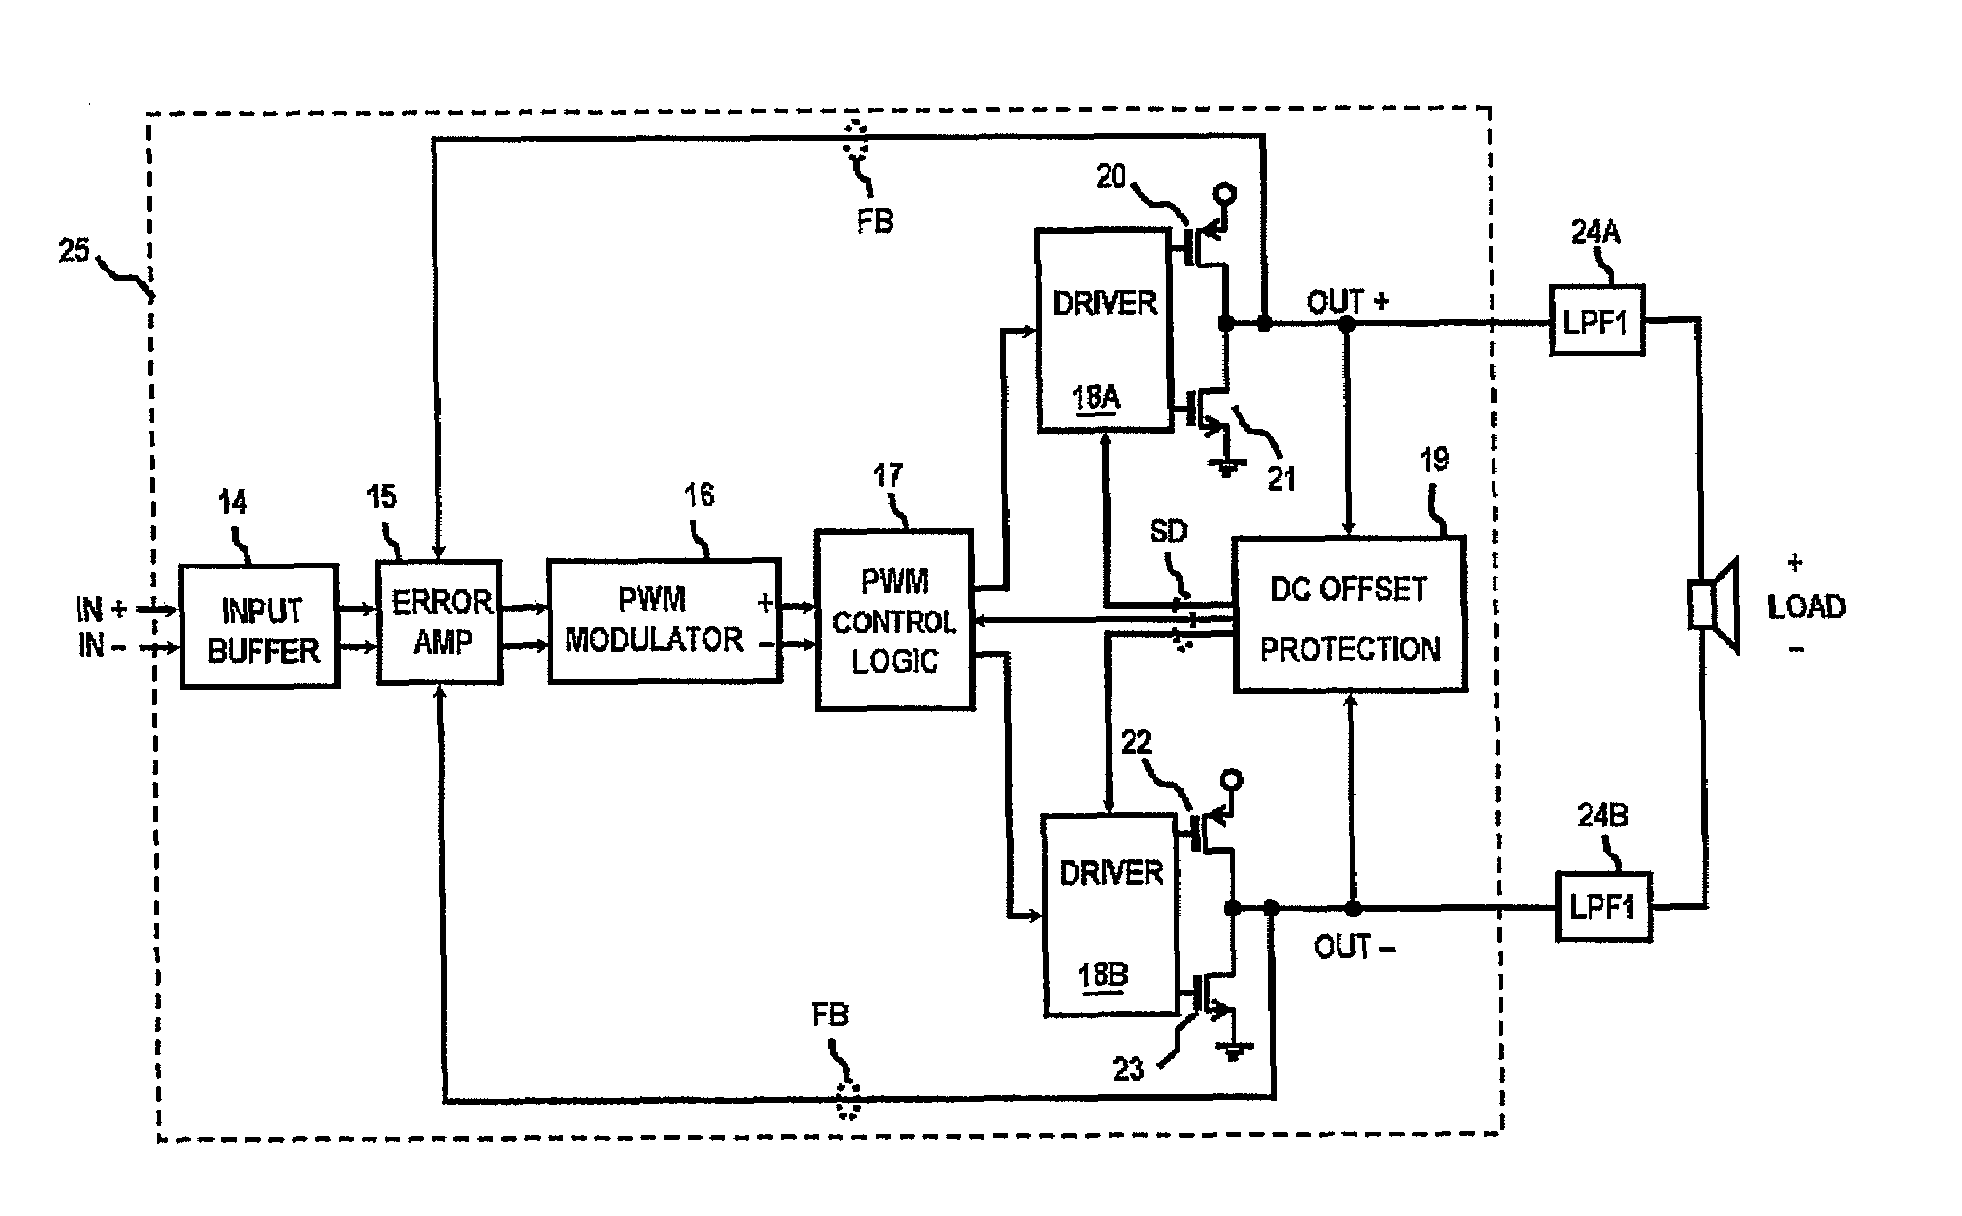 Output DC offset protection for class D amplifiers